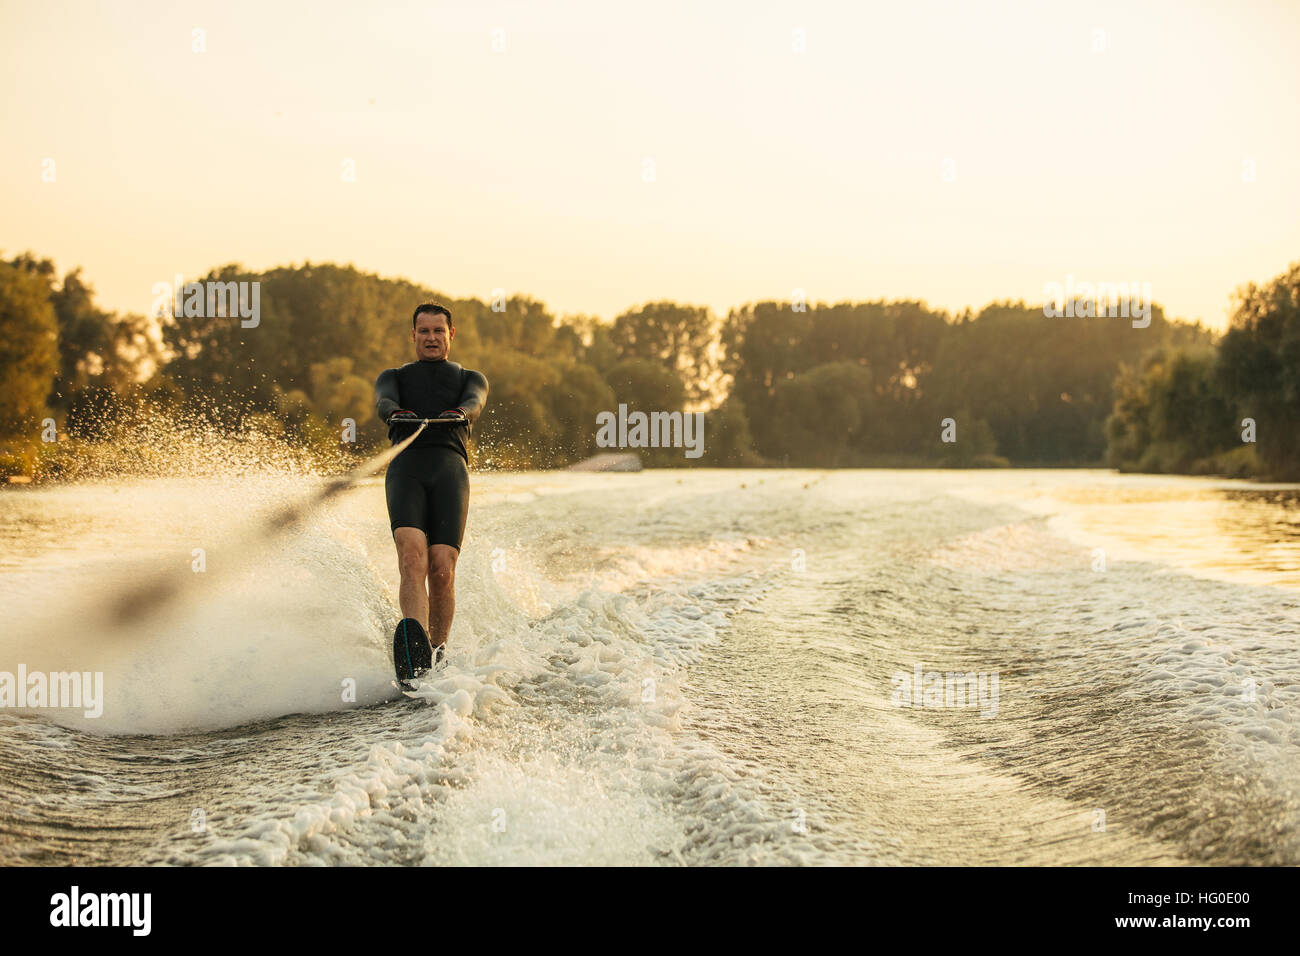 Man riding wakeboard on wave of motorboat. Male water skiing behind a boat on lake. Stock Photo